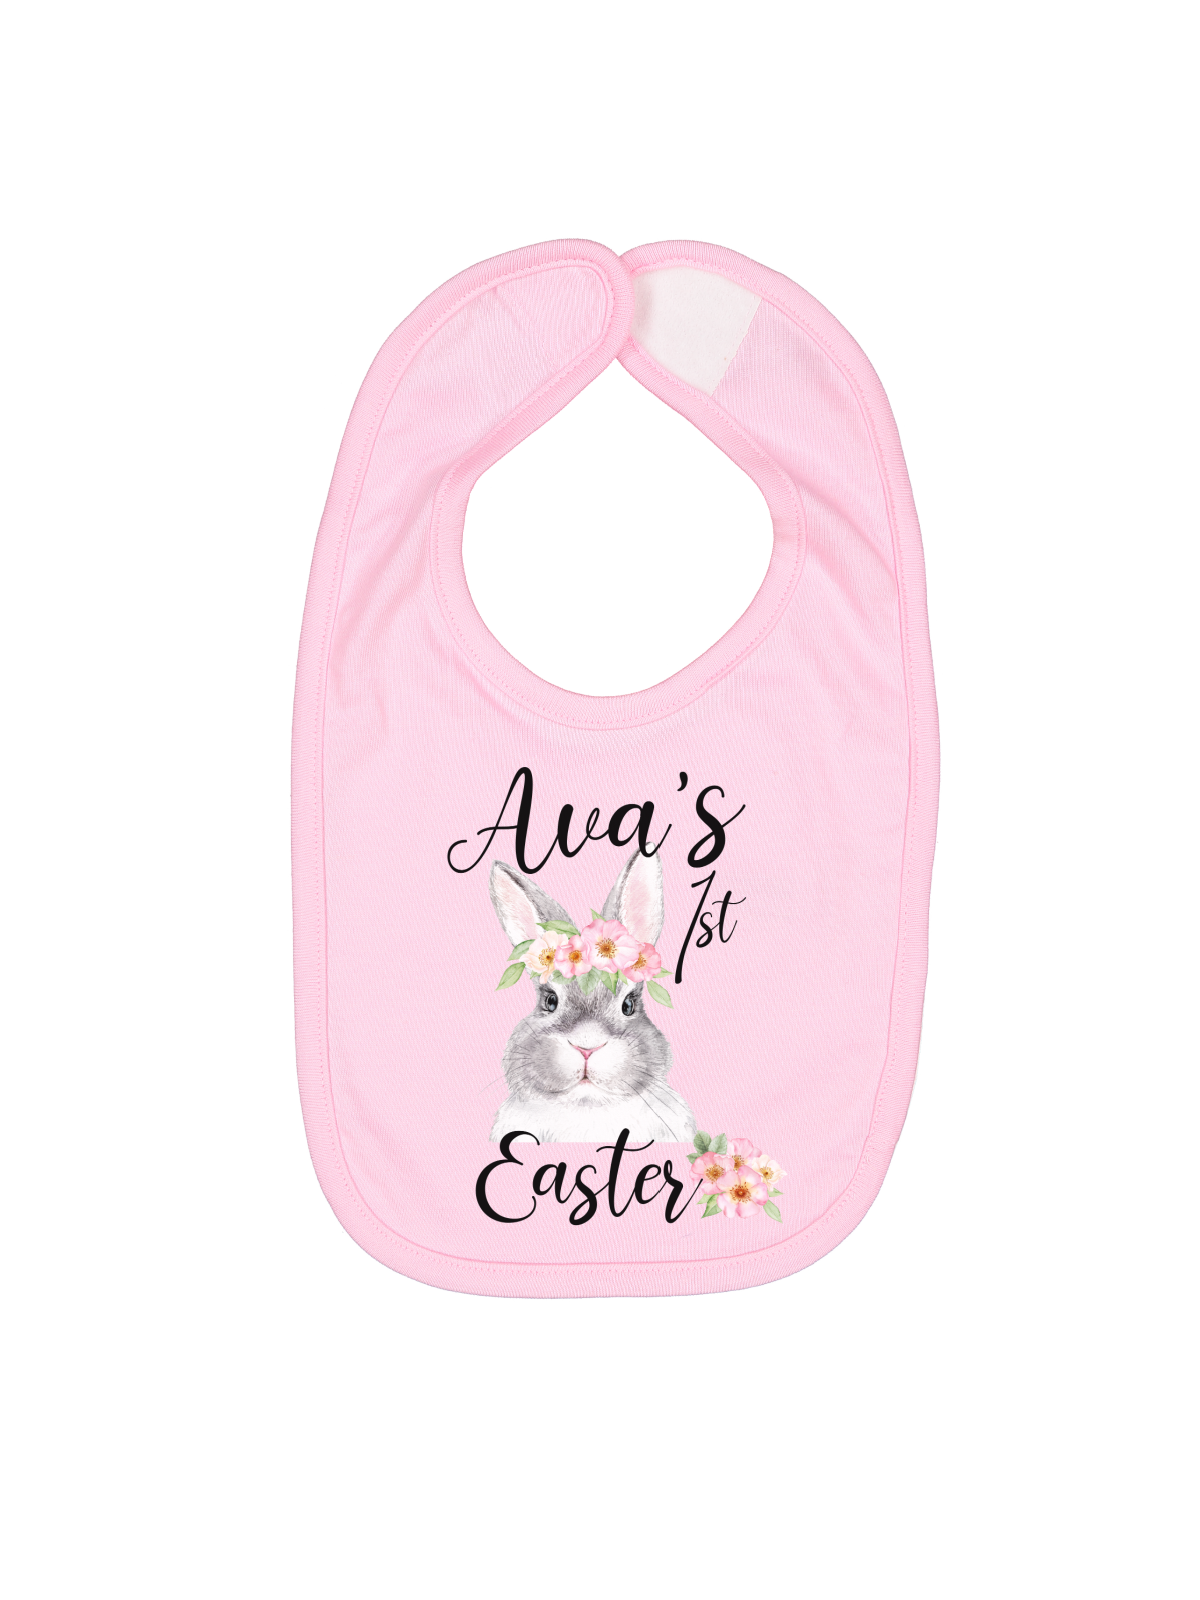 Personalized Baby Girl's First Easter Bib in White